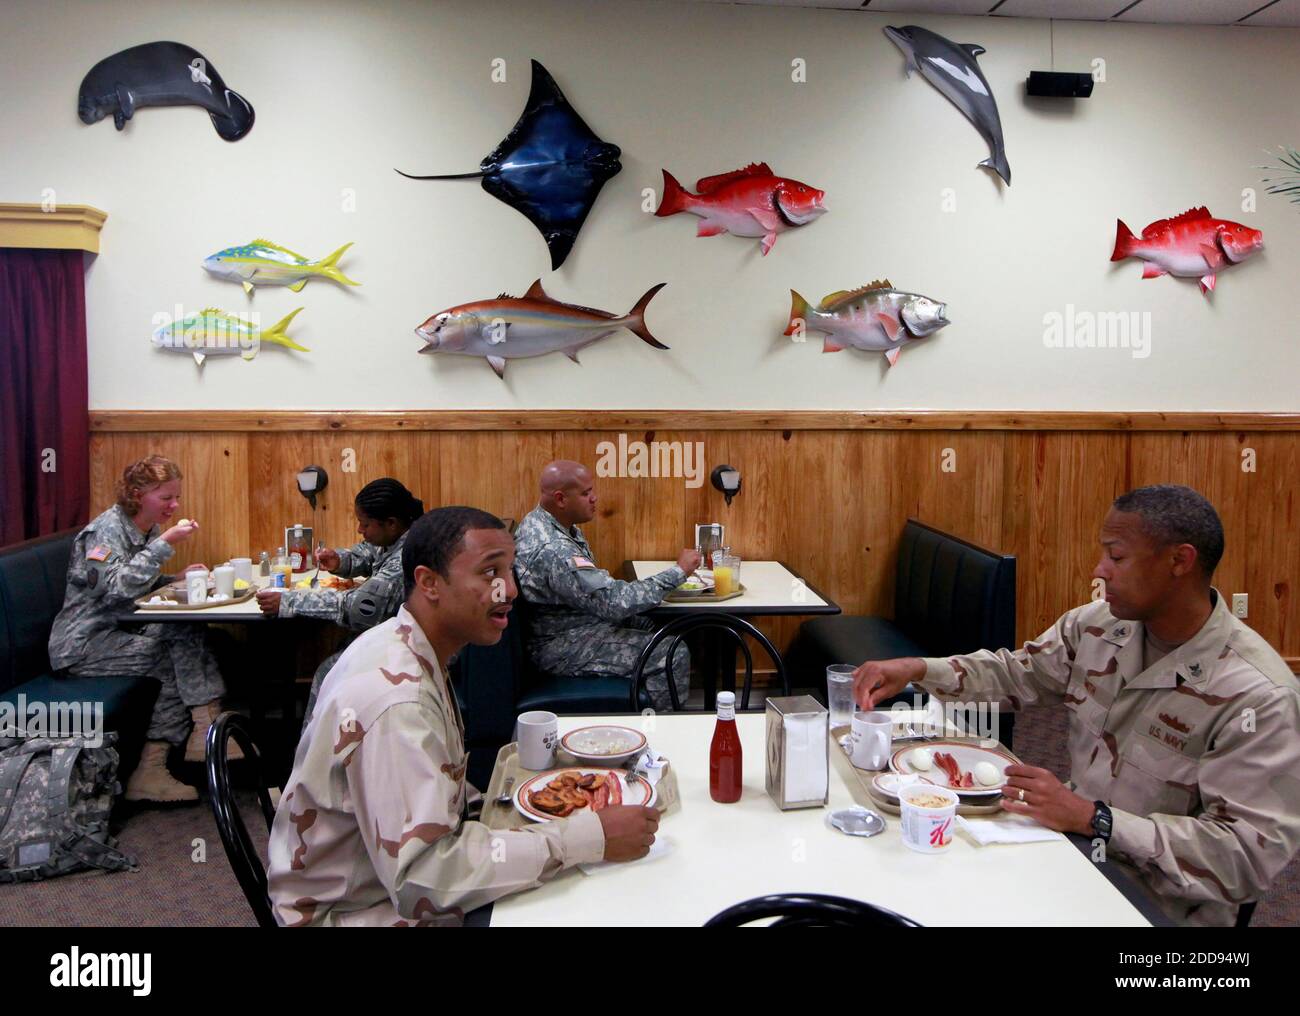 NO FILM, NO VIDEO, NO TV, NO DOCUMENTARY - Soldiers and sailors eat bacon-and-egg breakfasts beneath an aquatic motif at Gold Hill Galley, a cafeteria at the U.S. Navy base at Guantanamo Bay, Cuba on March 30, 2009. Photo by John VanBeekum/Miami Herald/MCT/ABACAPRESS.COM Stock Photo